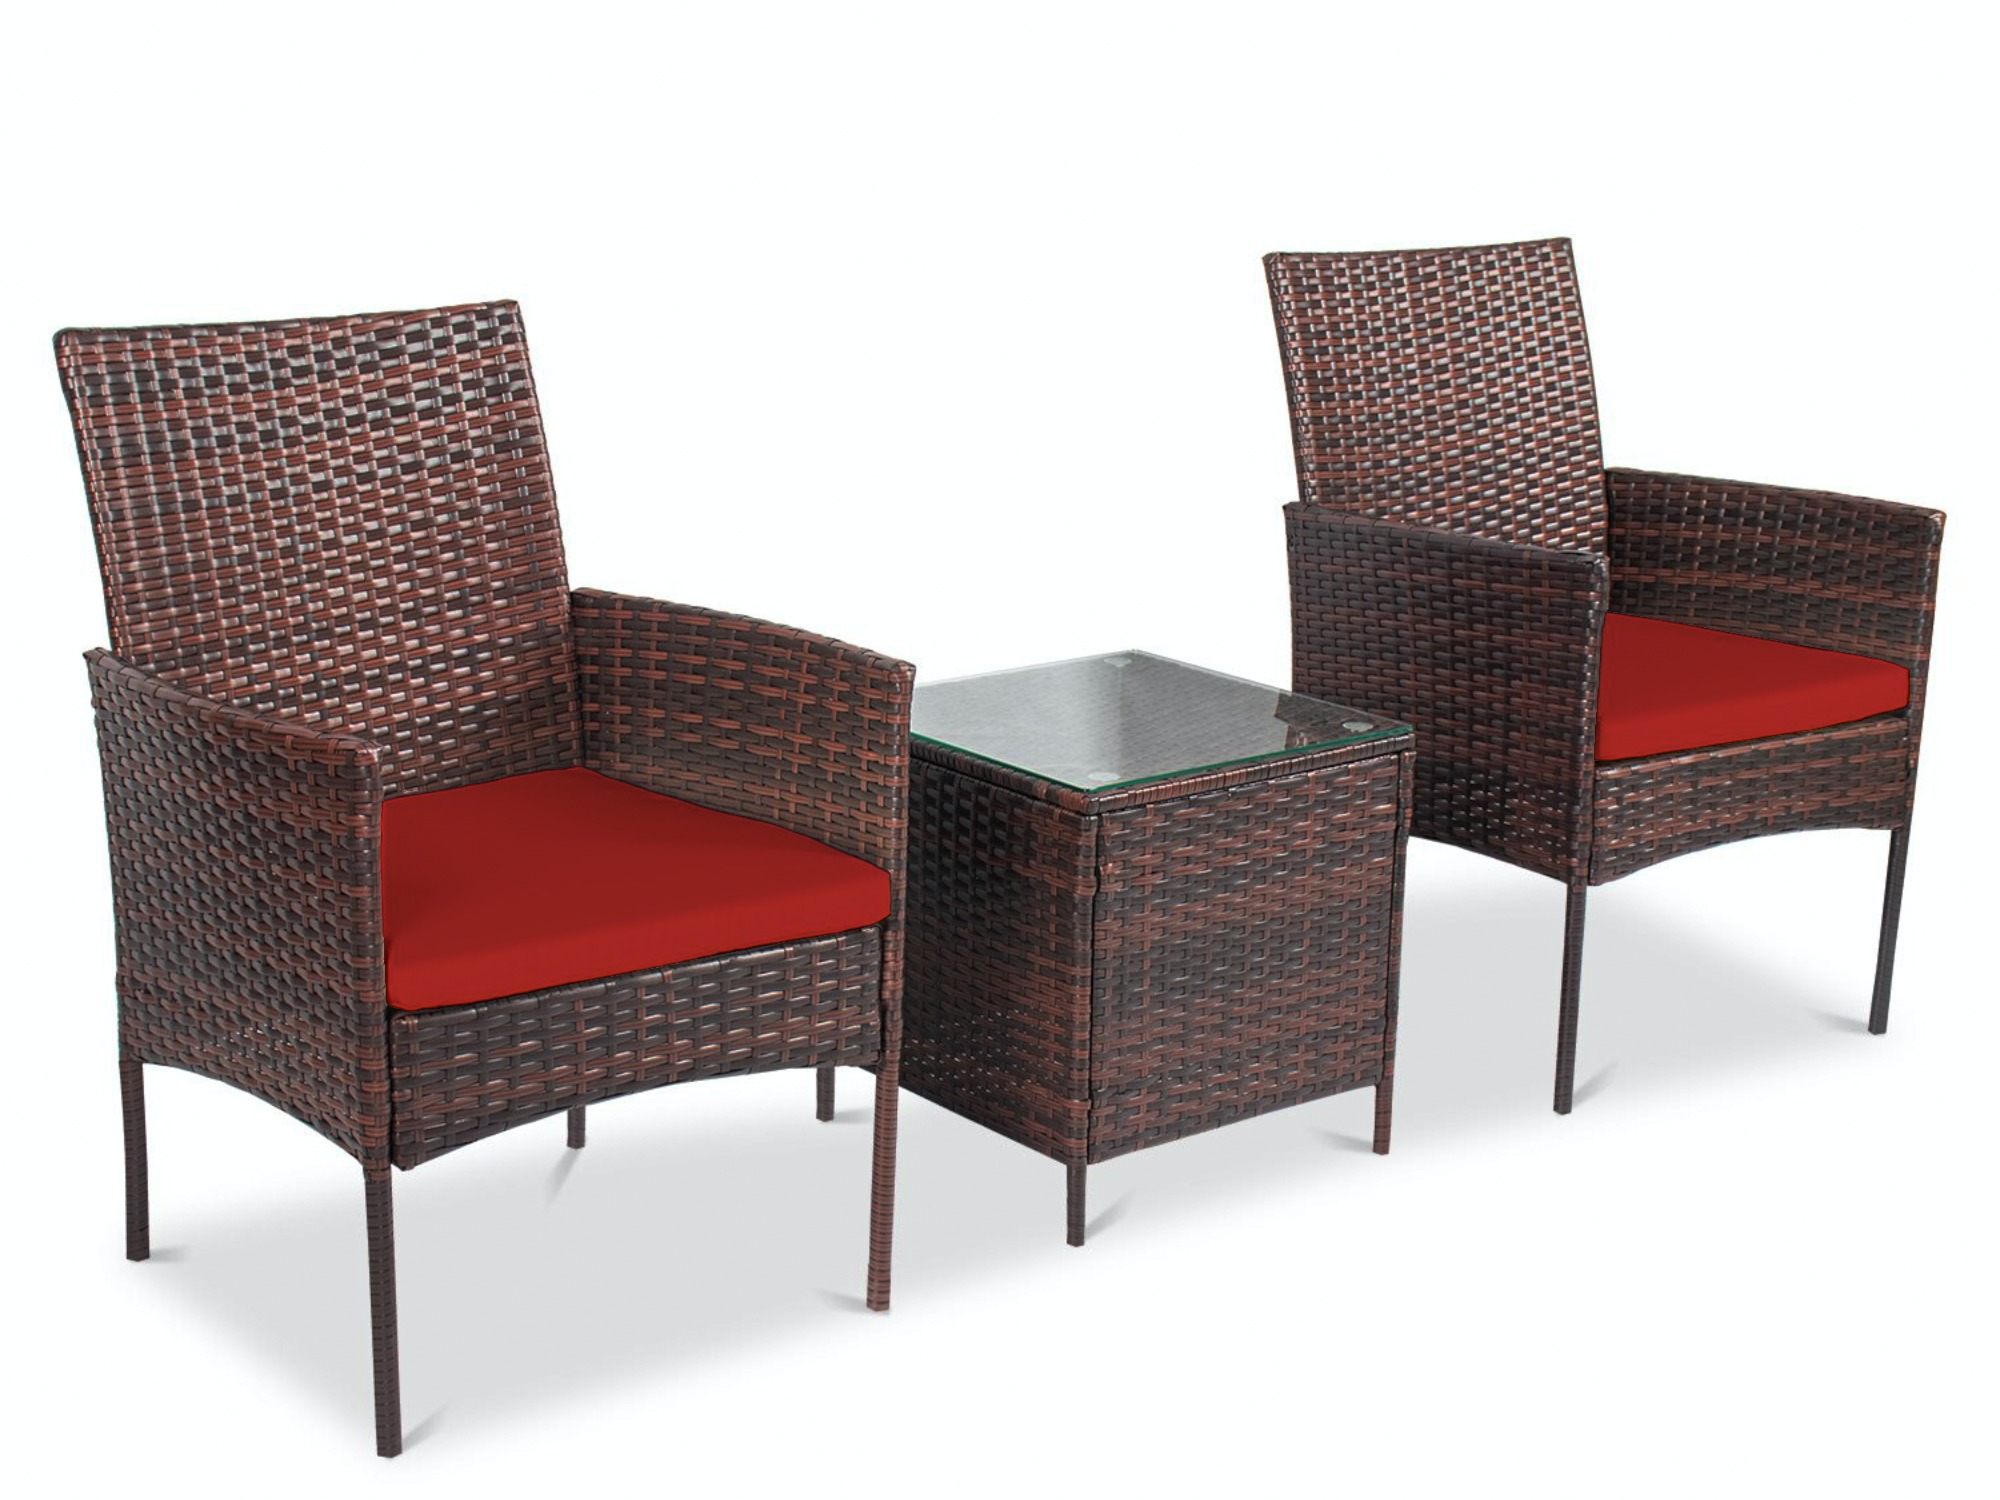 Zoey 3 Piece Stylish Design Rattan Furniture Set – 2 Relaxing Soft Cushion Chairs With a Cafe Table - Red - image 1 of 10